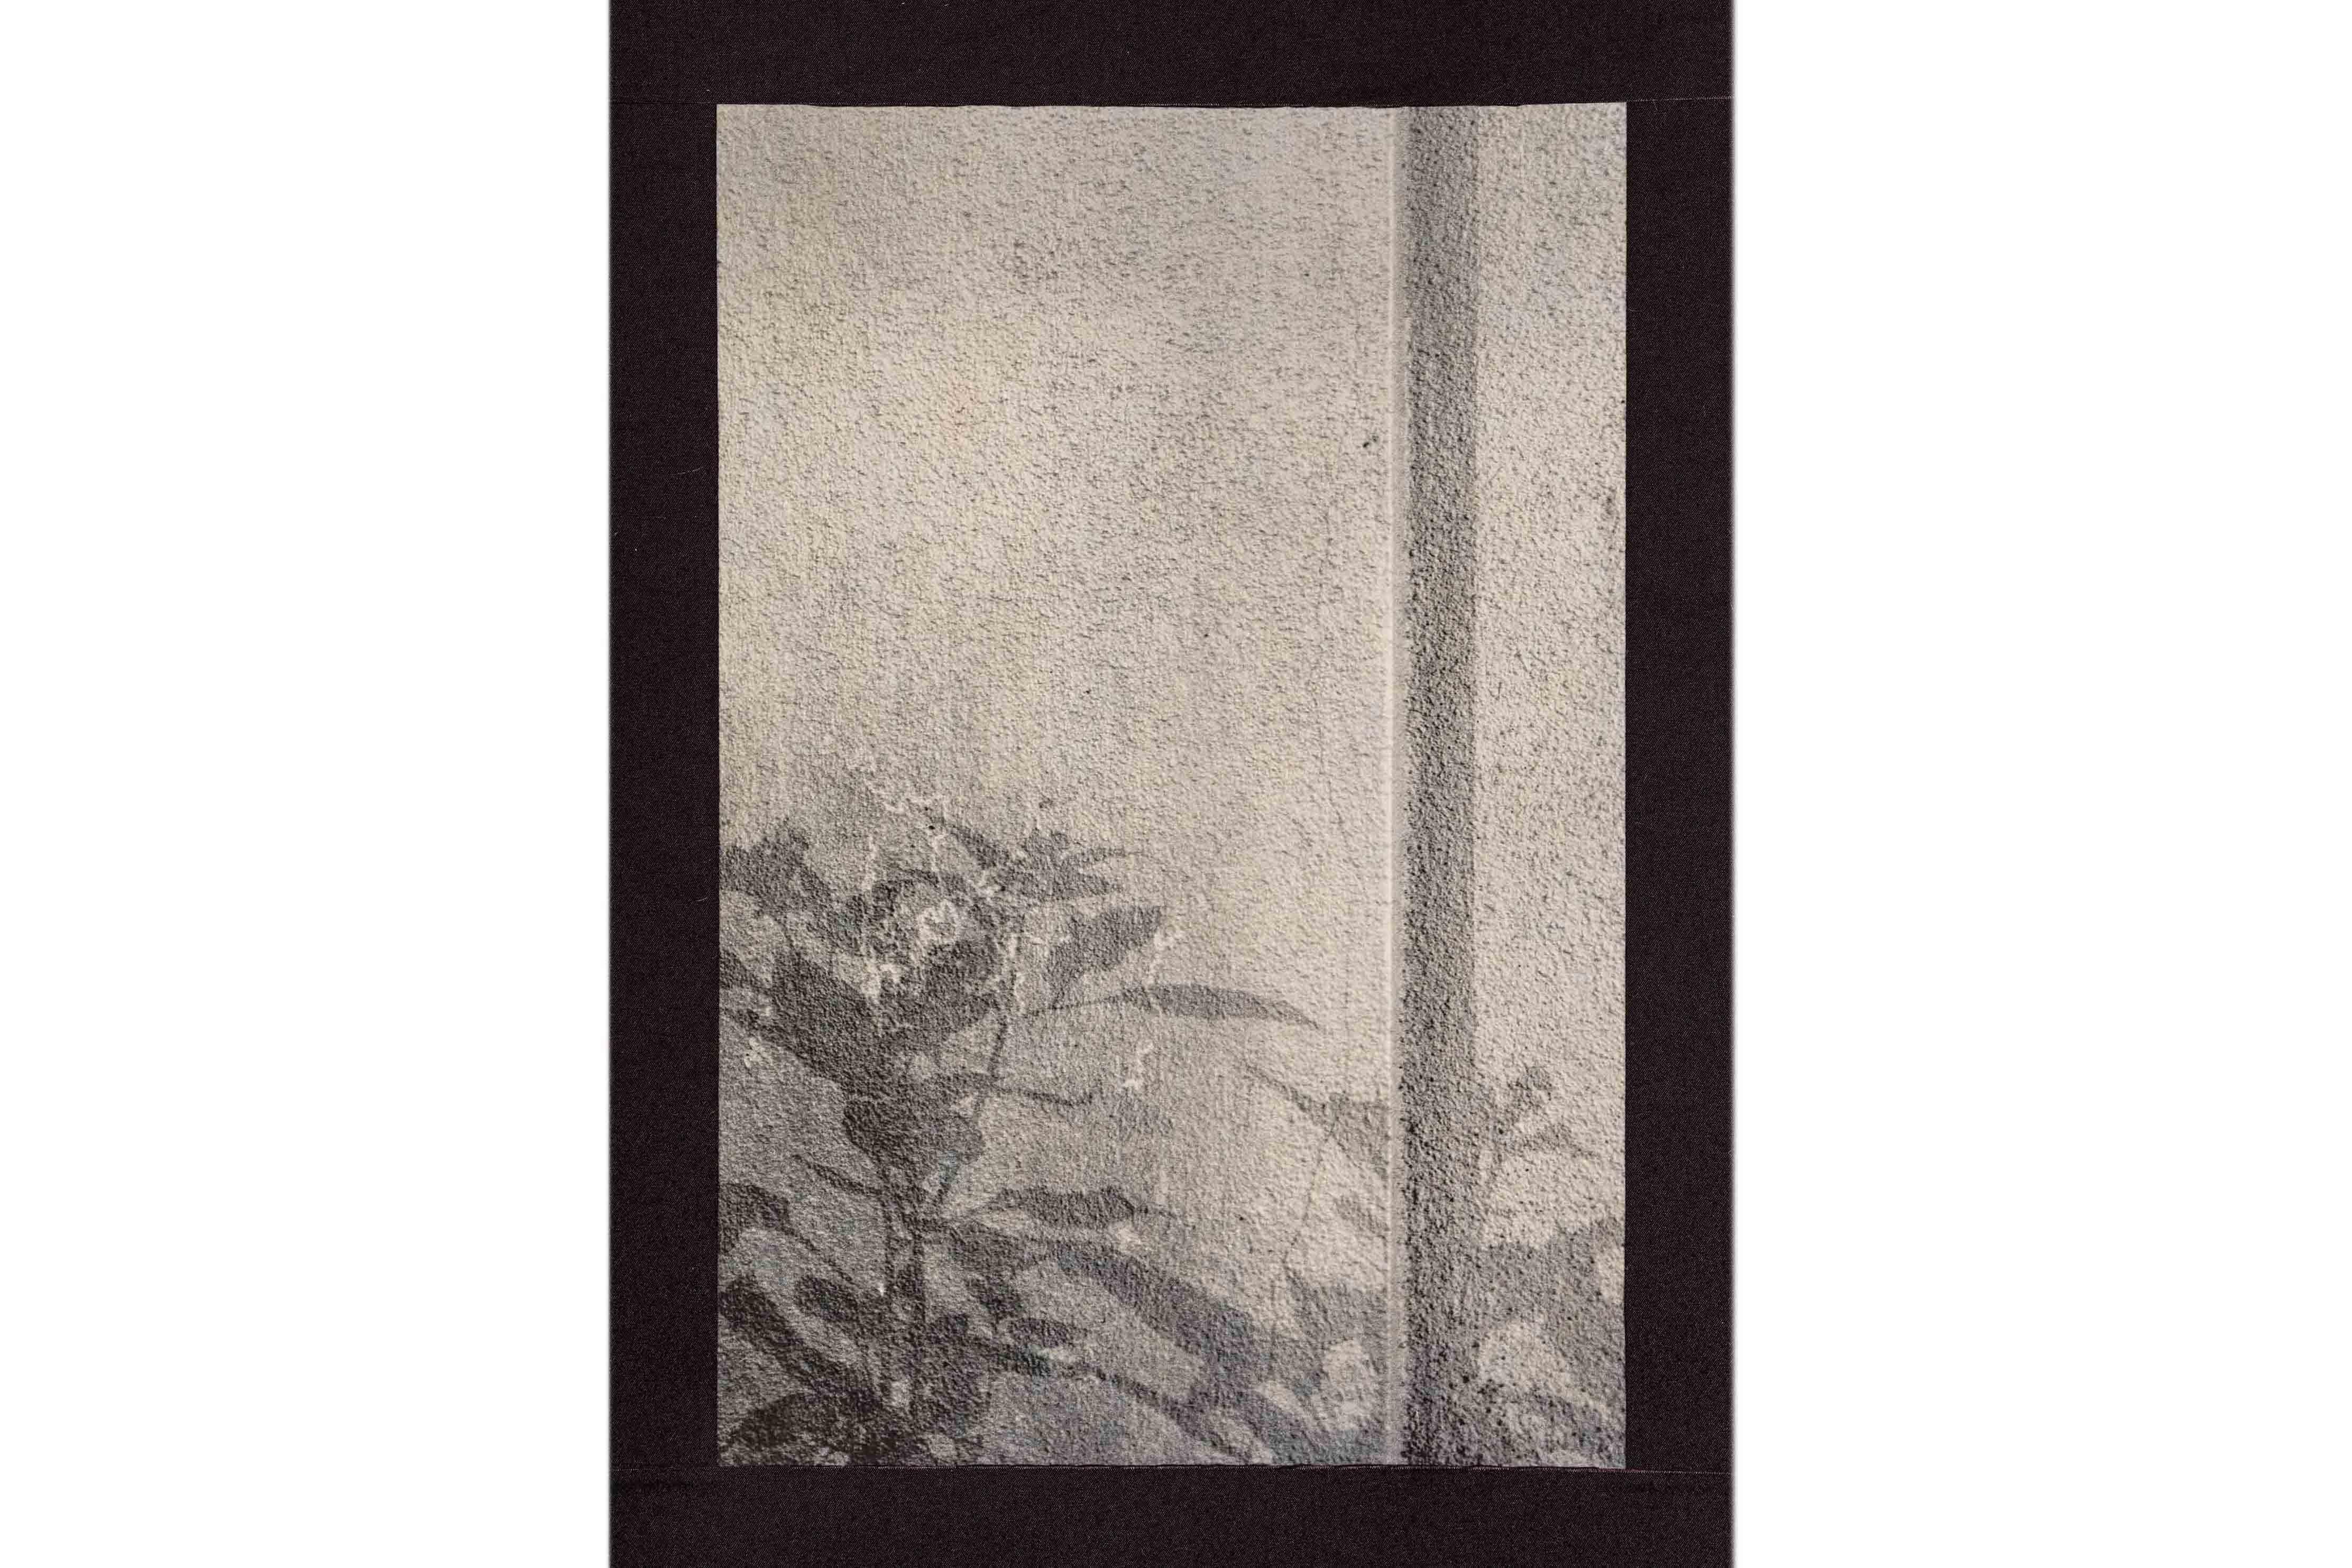 Inkjet print of digital photograph on hemp washi

Kojun is an self-taught multimédia American artist born in 1977 based in Tokyo, Japan since 1999. Kojun project started in 2010 explores the experiences of beauty glimpsed  in everyday life. The